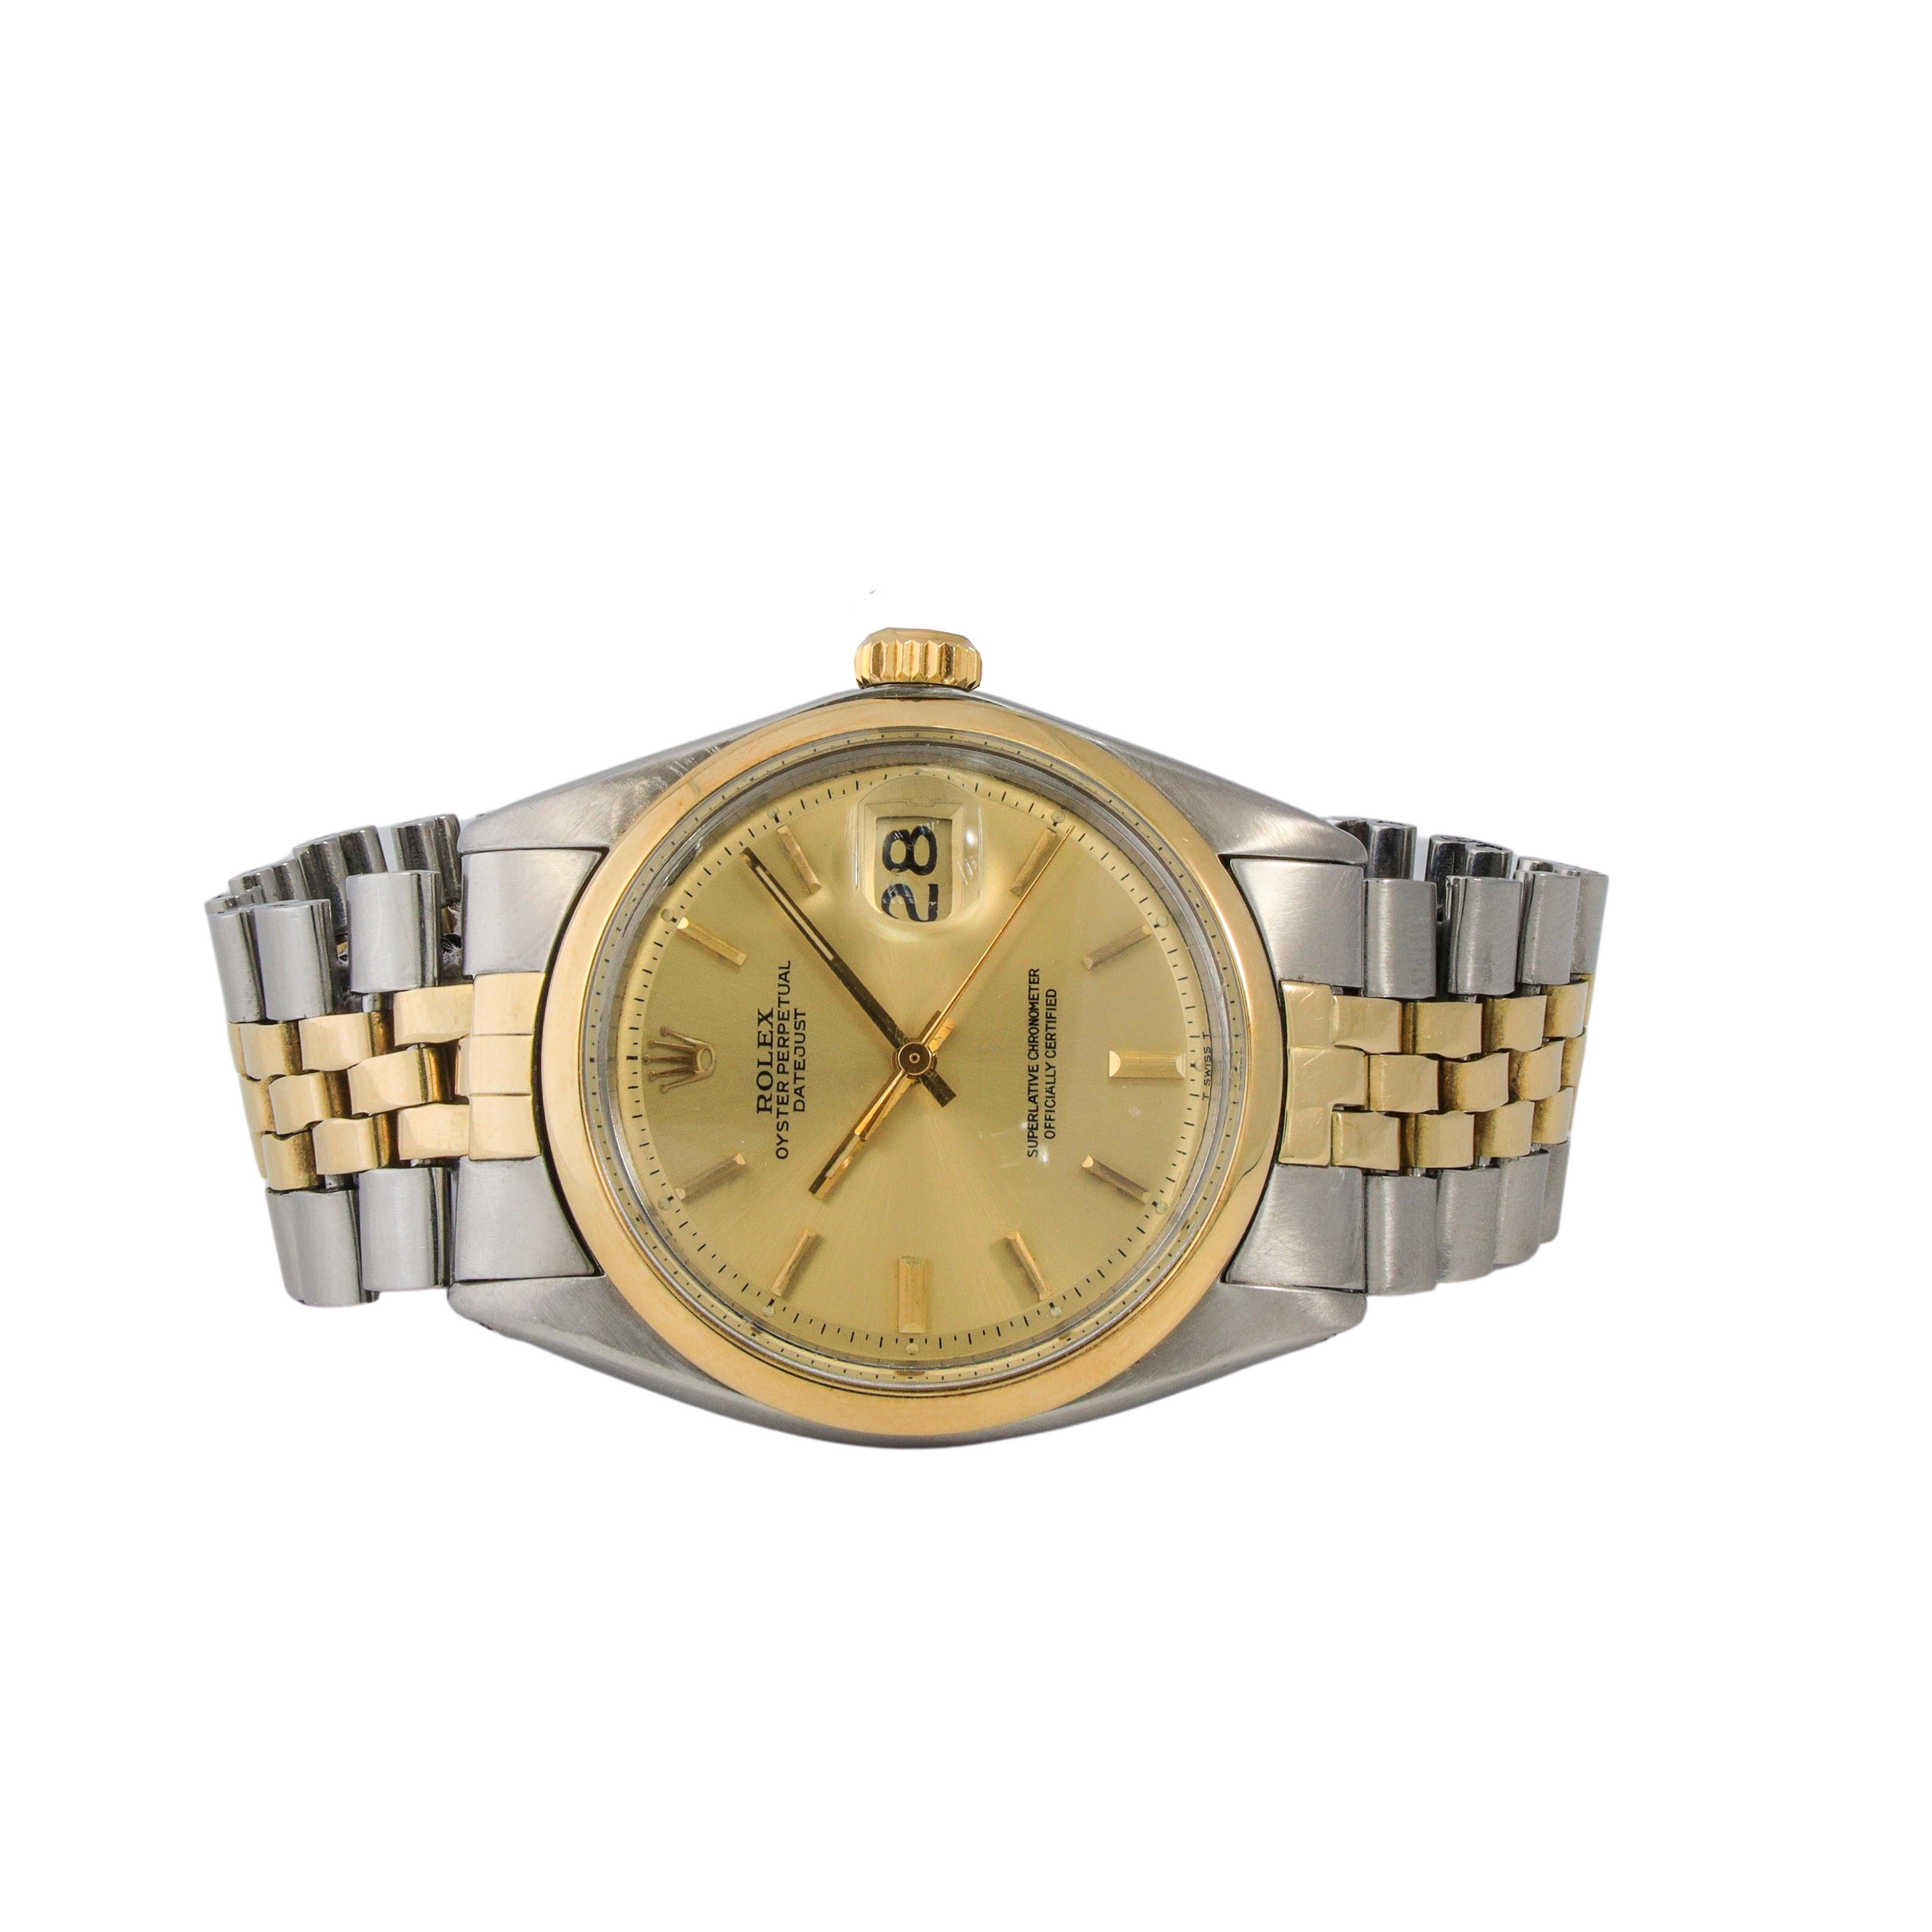 Mens Rolex- Datejust 
Date: 1972
36 mm 
Preowned 
Reference: 1600
18kt yellow and stainless steel
